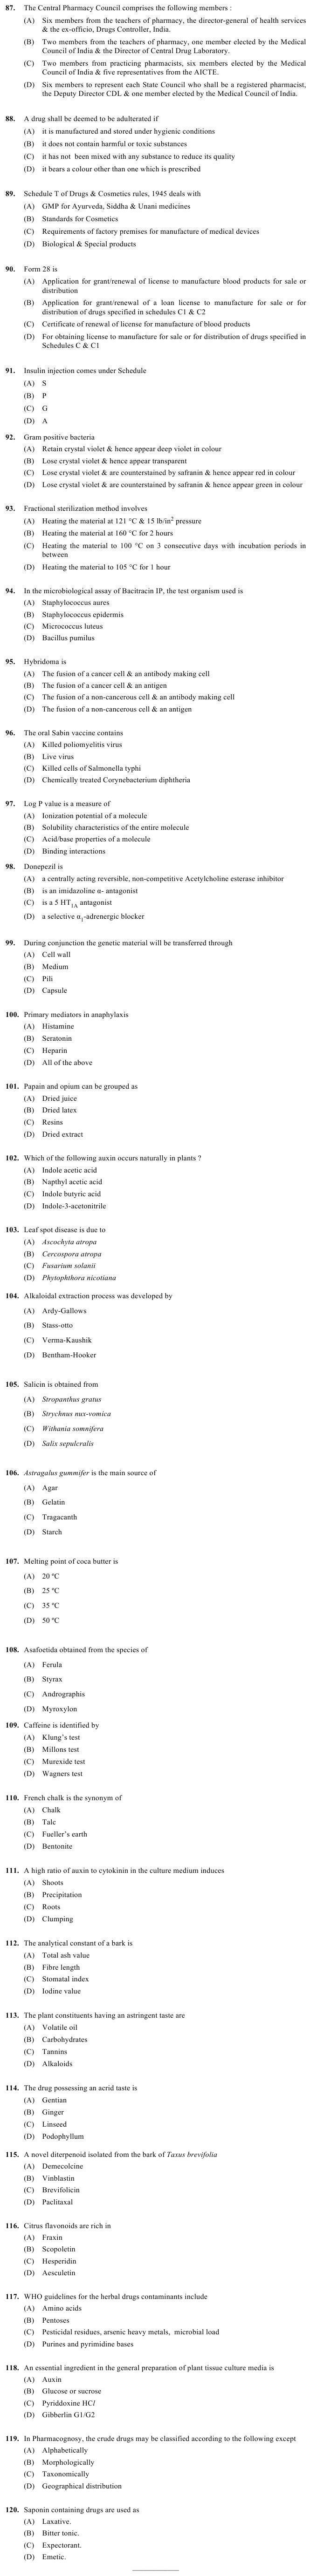 OJEE 2013 Question Paper for PGAT Pharmacy